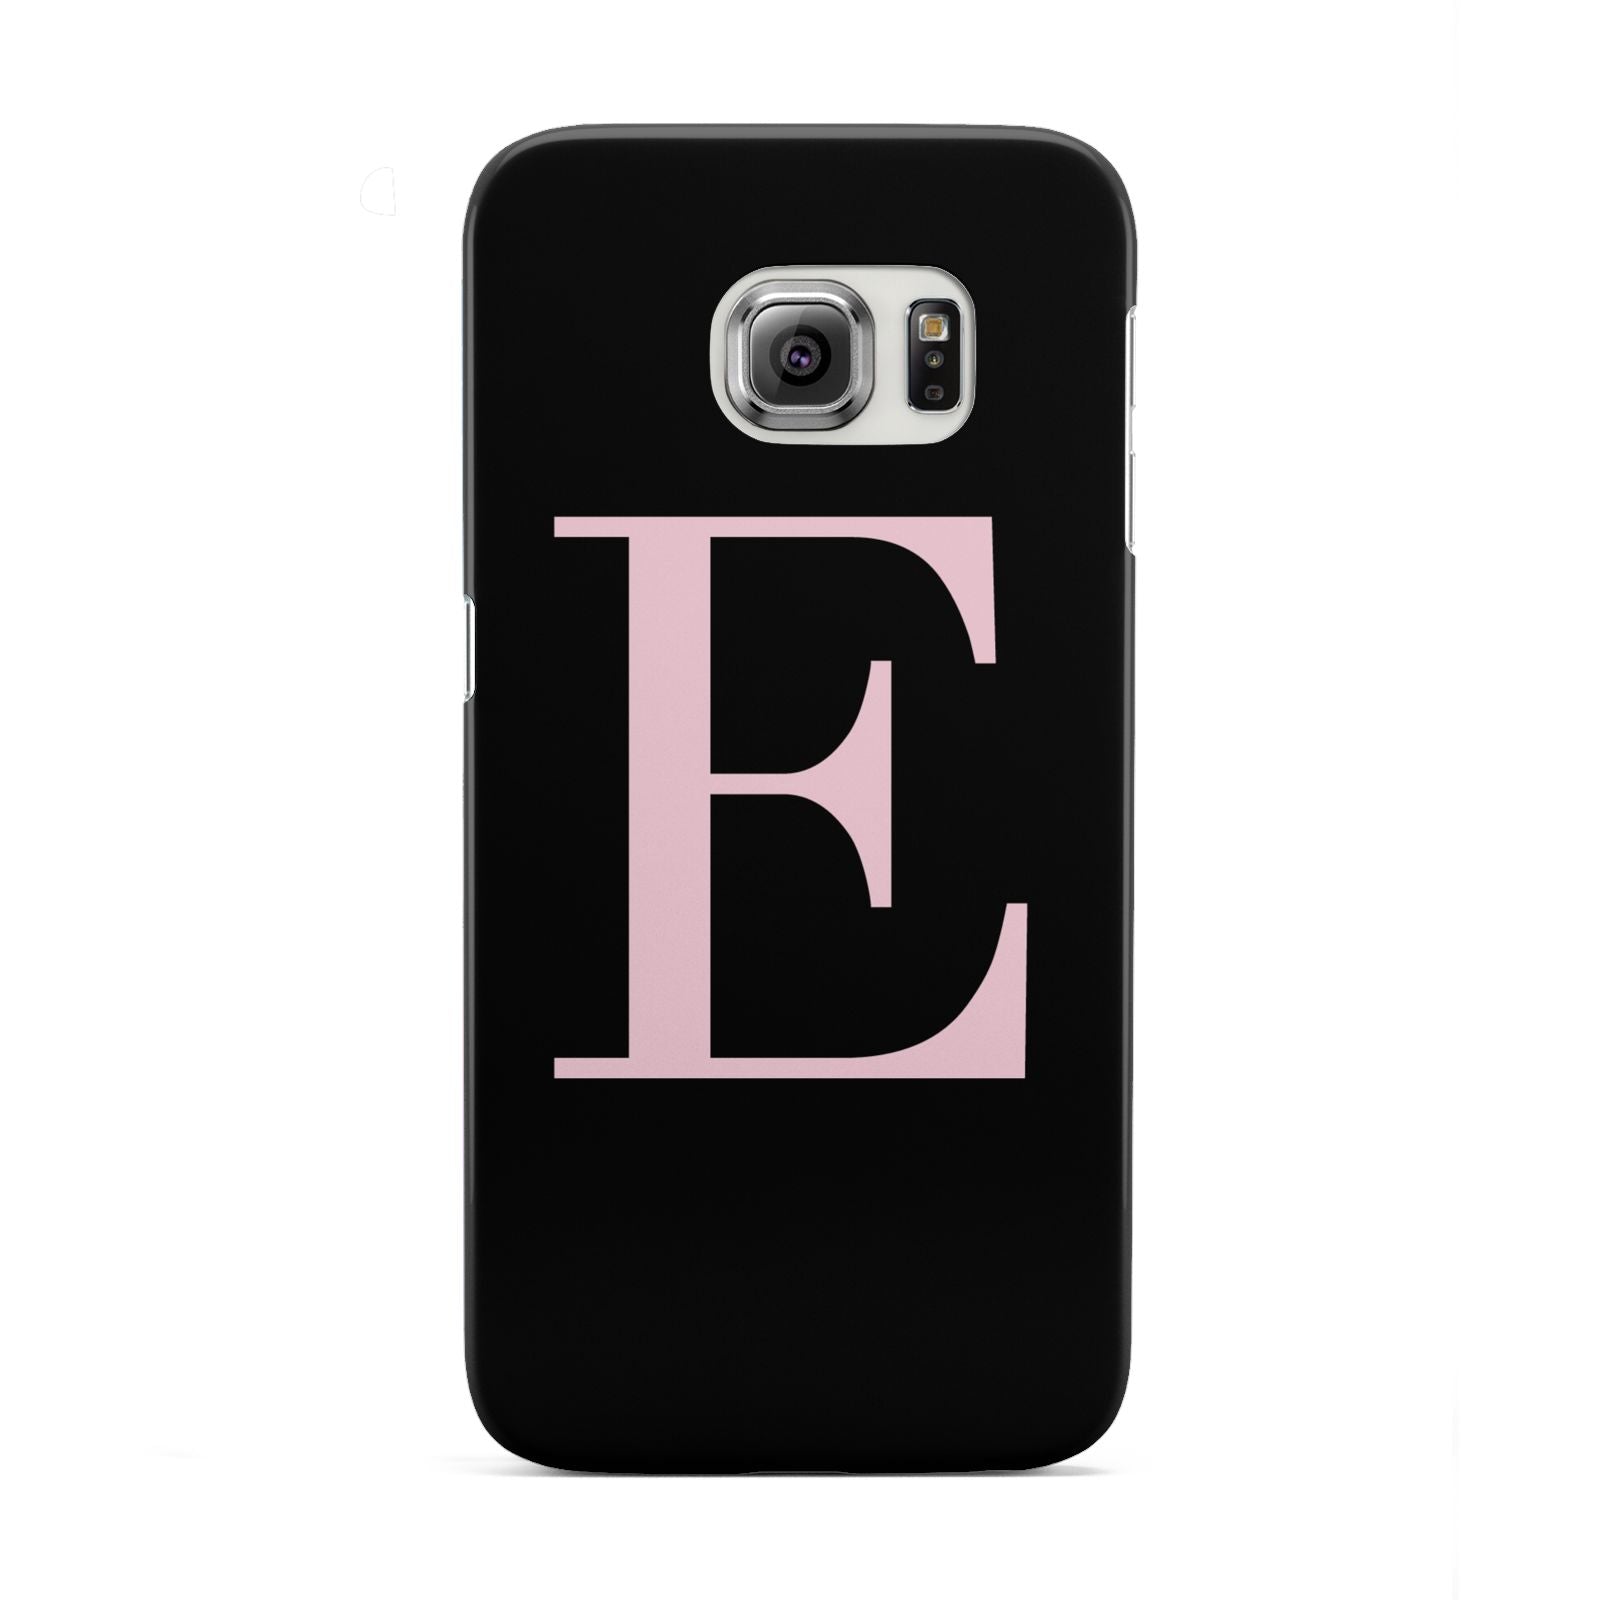 Black with Pink Personalised Monogram Samsung Galaxy S6 Edge Case